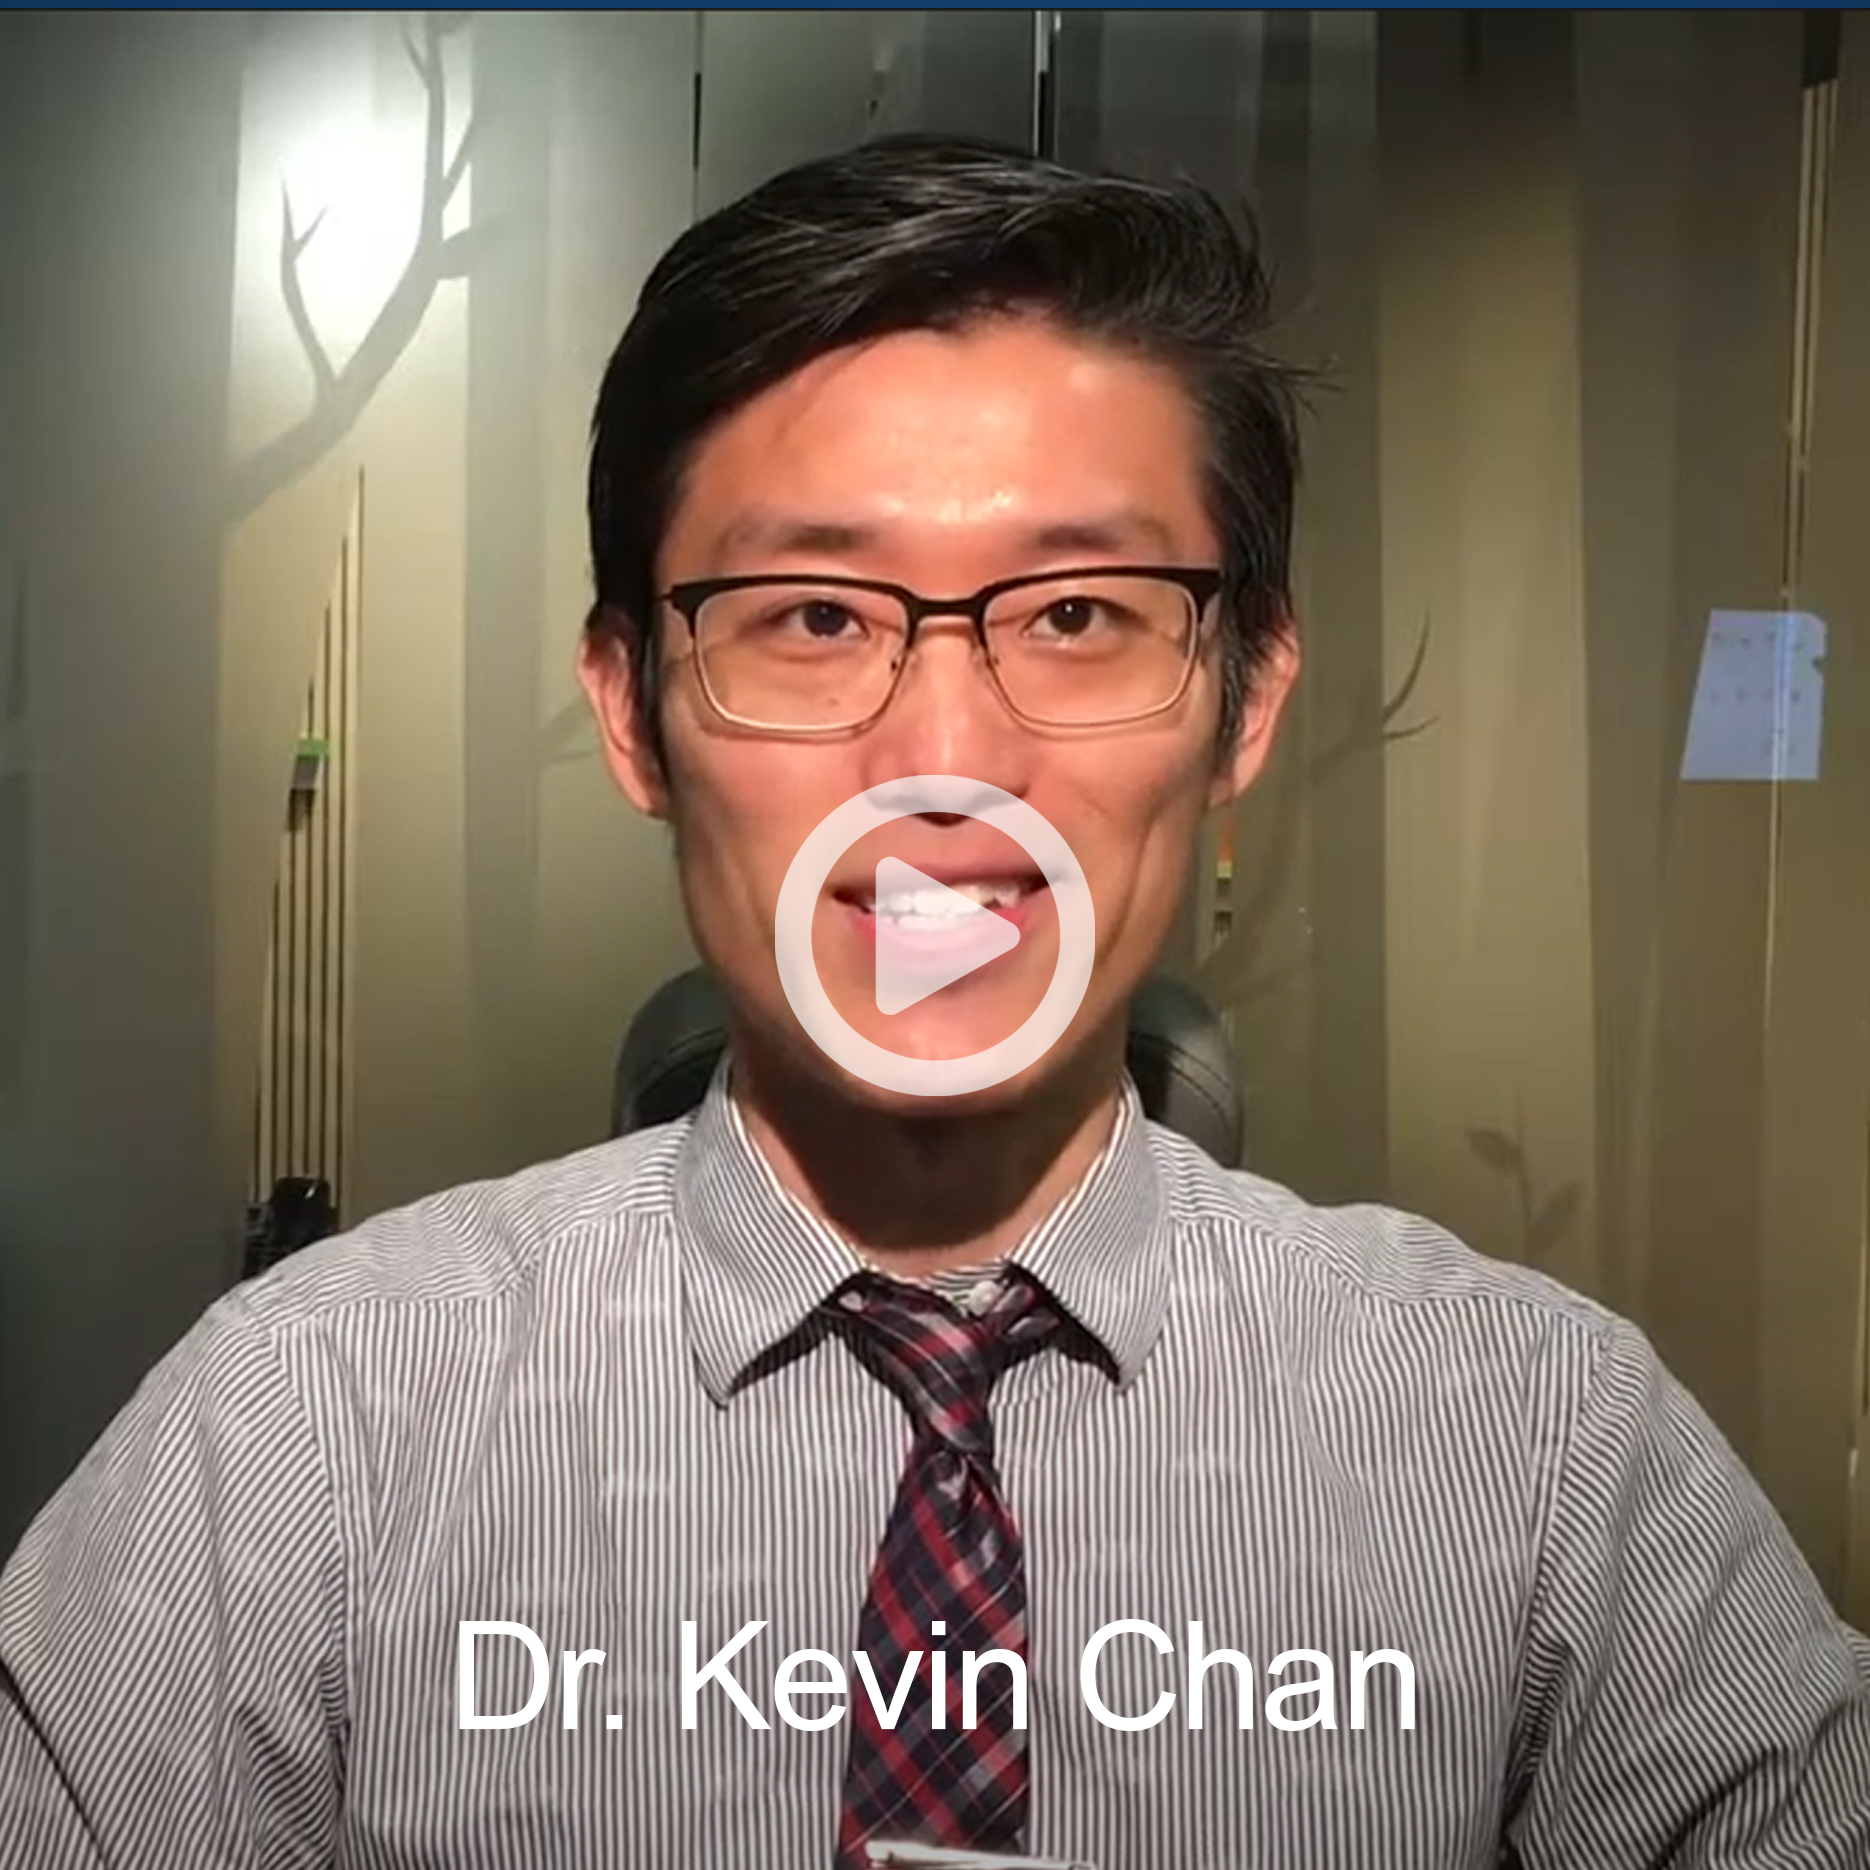 <strong>Proactive Myopia Management Orthokeratology Fits for the Astigmatic Patient - Dr. Kevin Chan</strong>